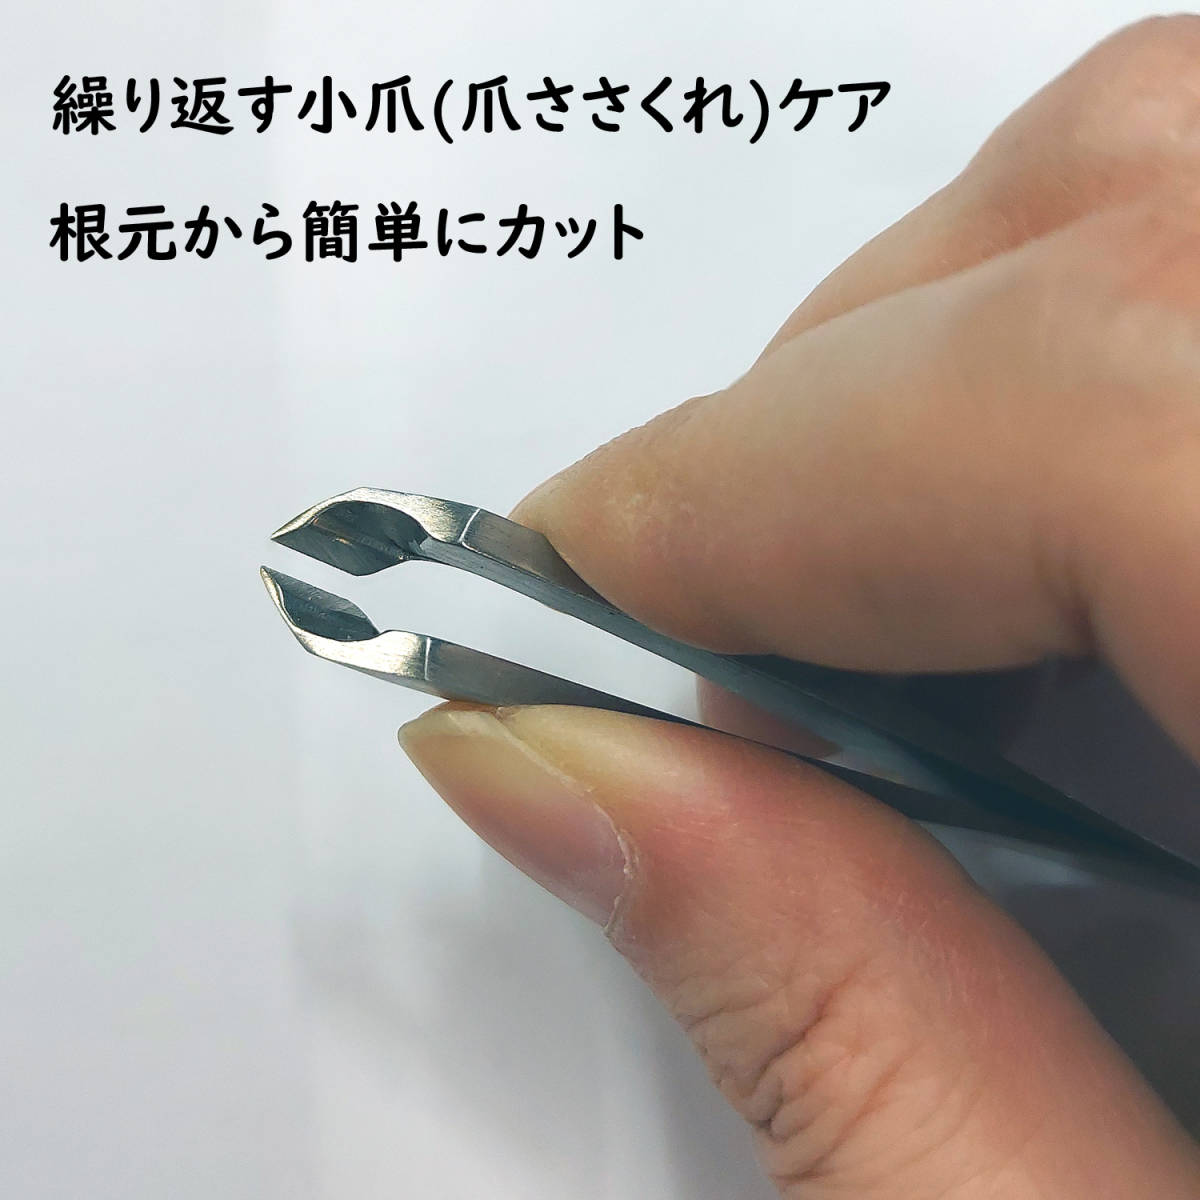  easy to use! small nail clippers small nail nippers .... nippers . leather nippers .... tweezers type compact nails nippers nail care 